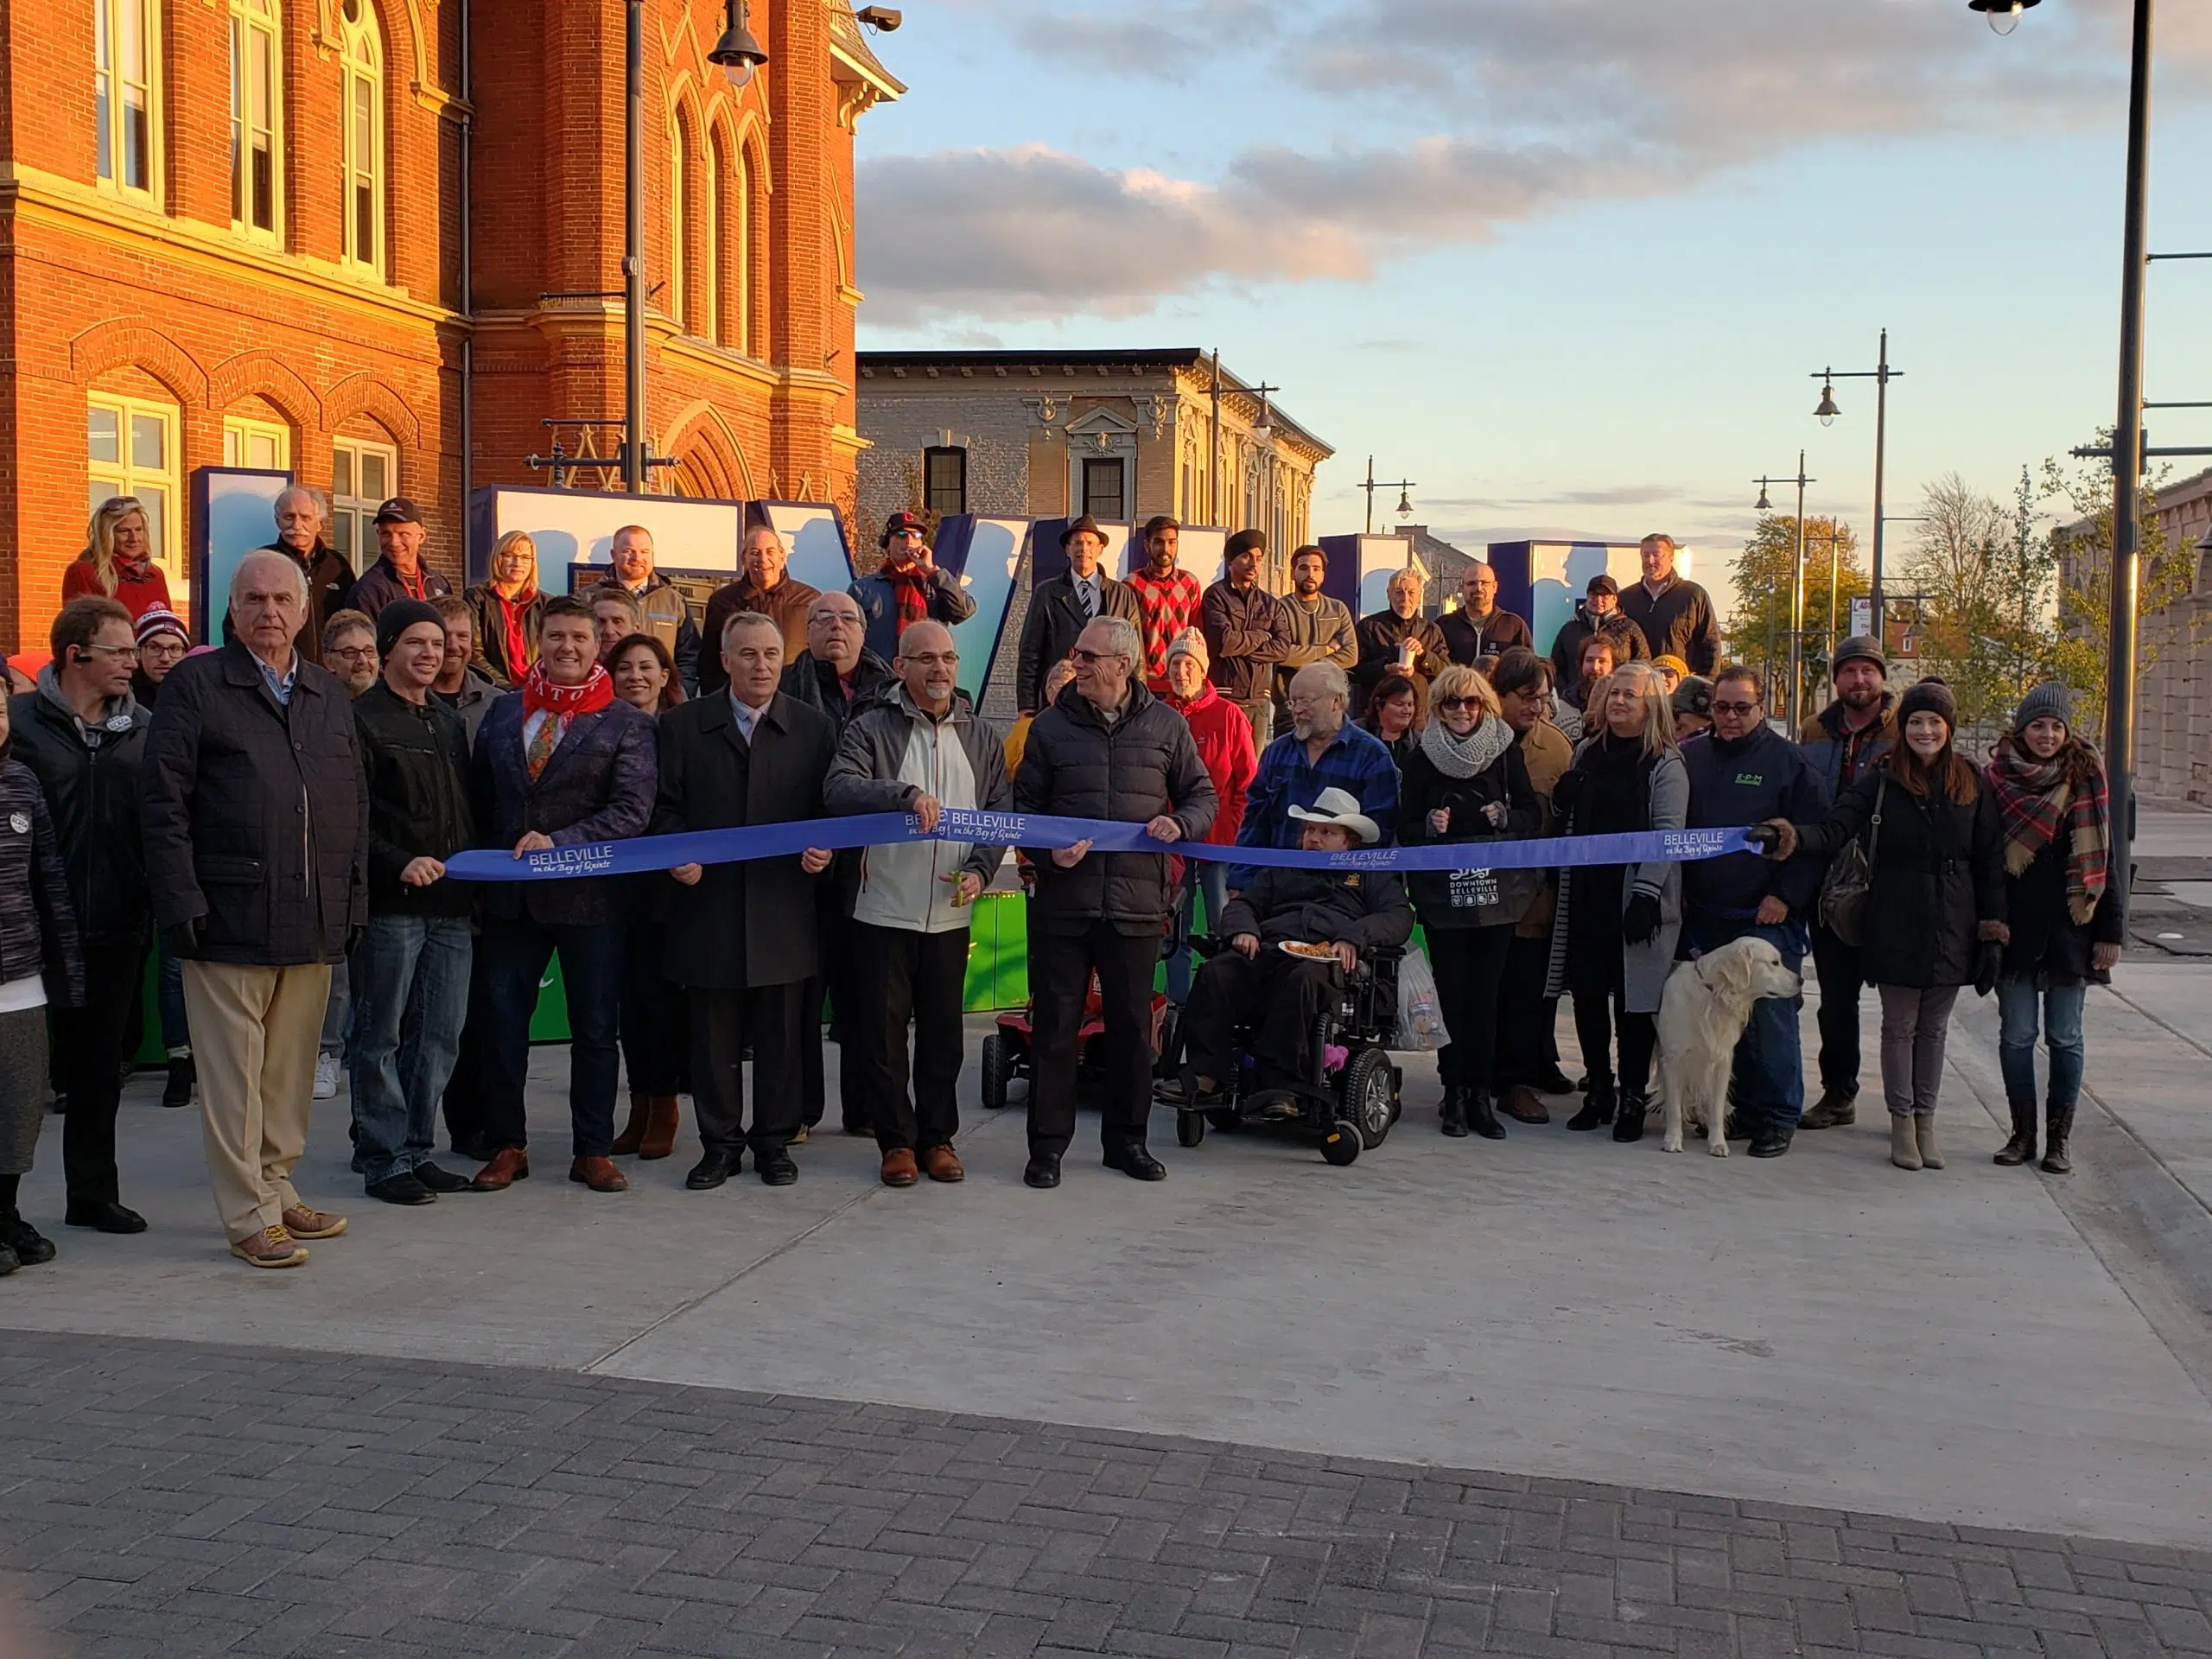 Downtown Belleville officially reopened for business